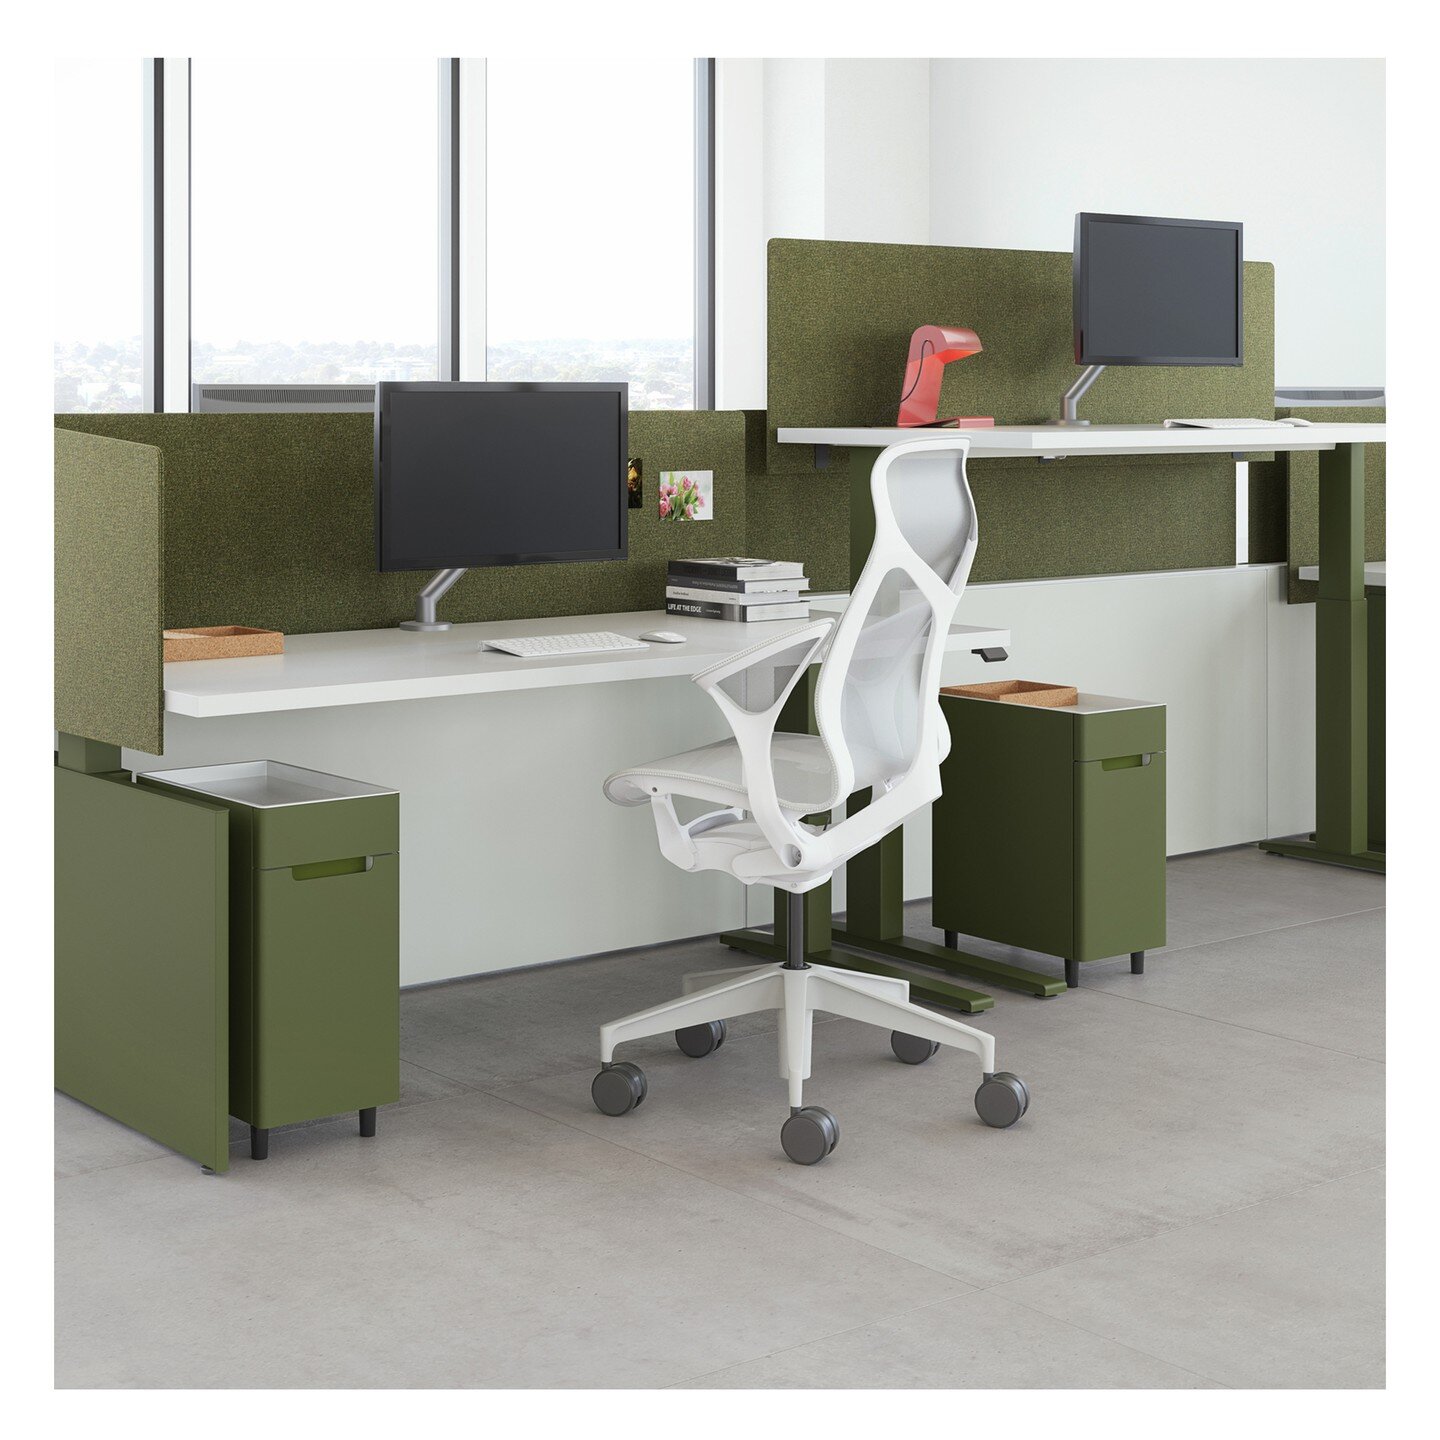 Make your sit-to-stand desk experience even better with Ambit Workspace Solutions&mdash;a comprehensive portfolio of components and&nbsp;accessories that enrich Herman Miller&rsquo;s existing height-adjustable table product lines and&nbsp;elevates&nb